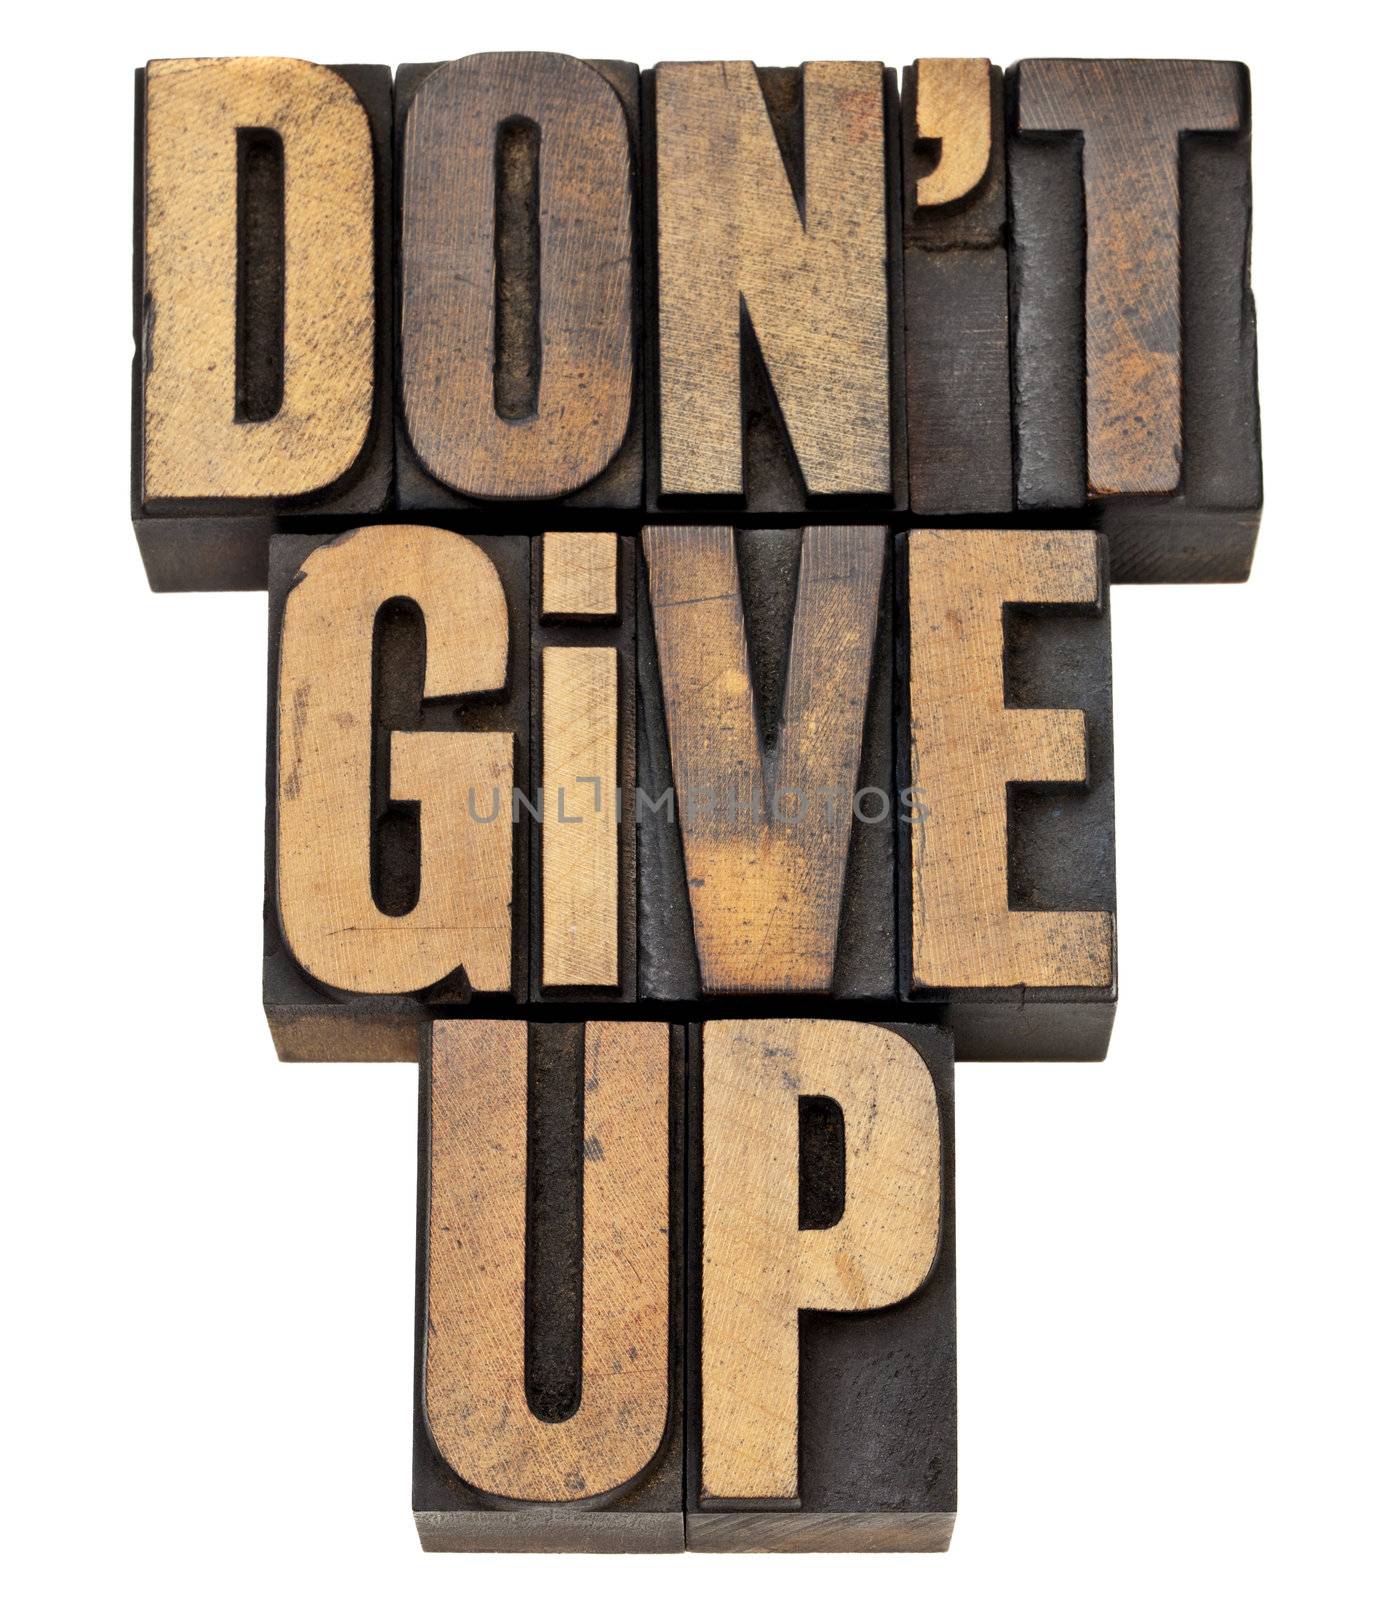 do not give up - motivation concept - isolated phrase in vintage letterpress wood type